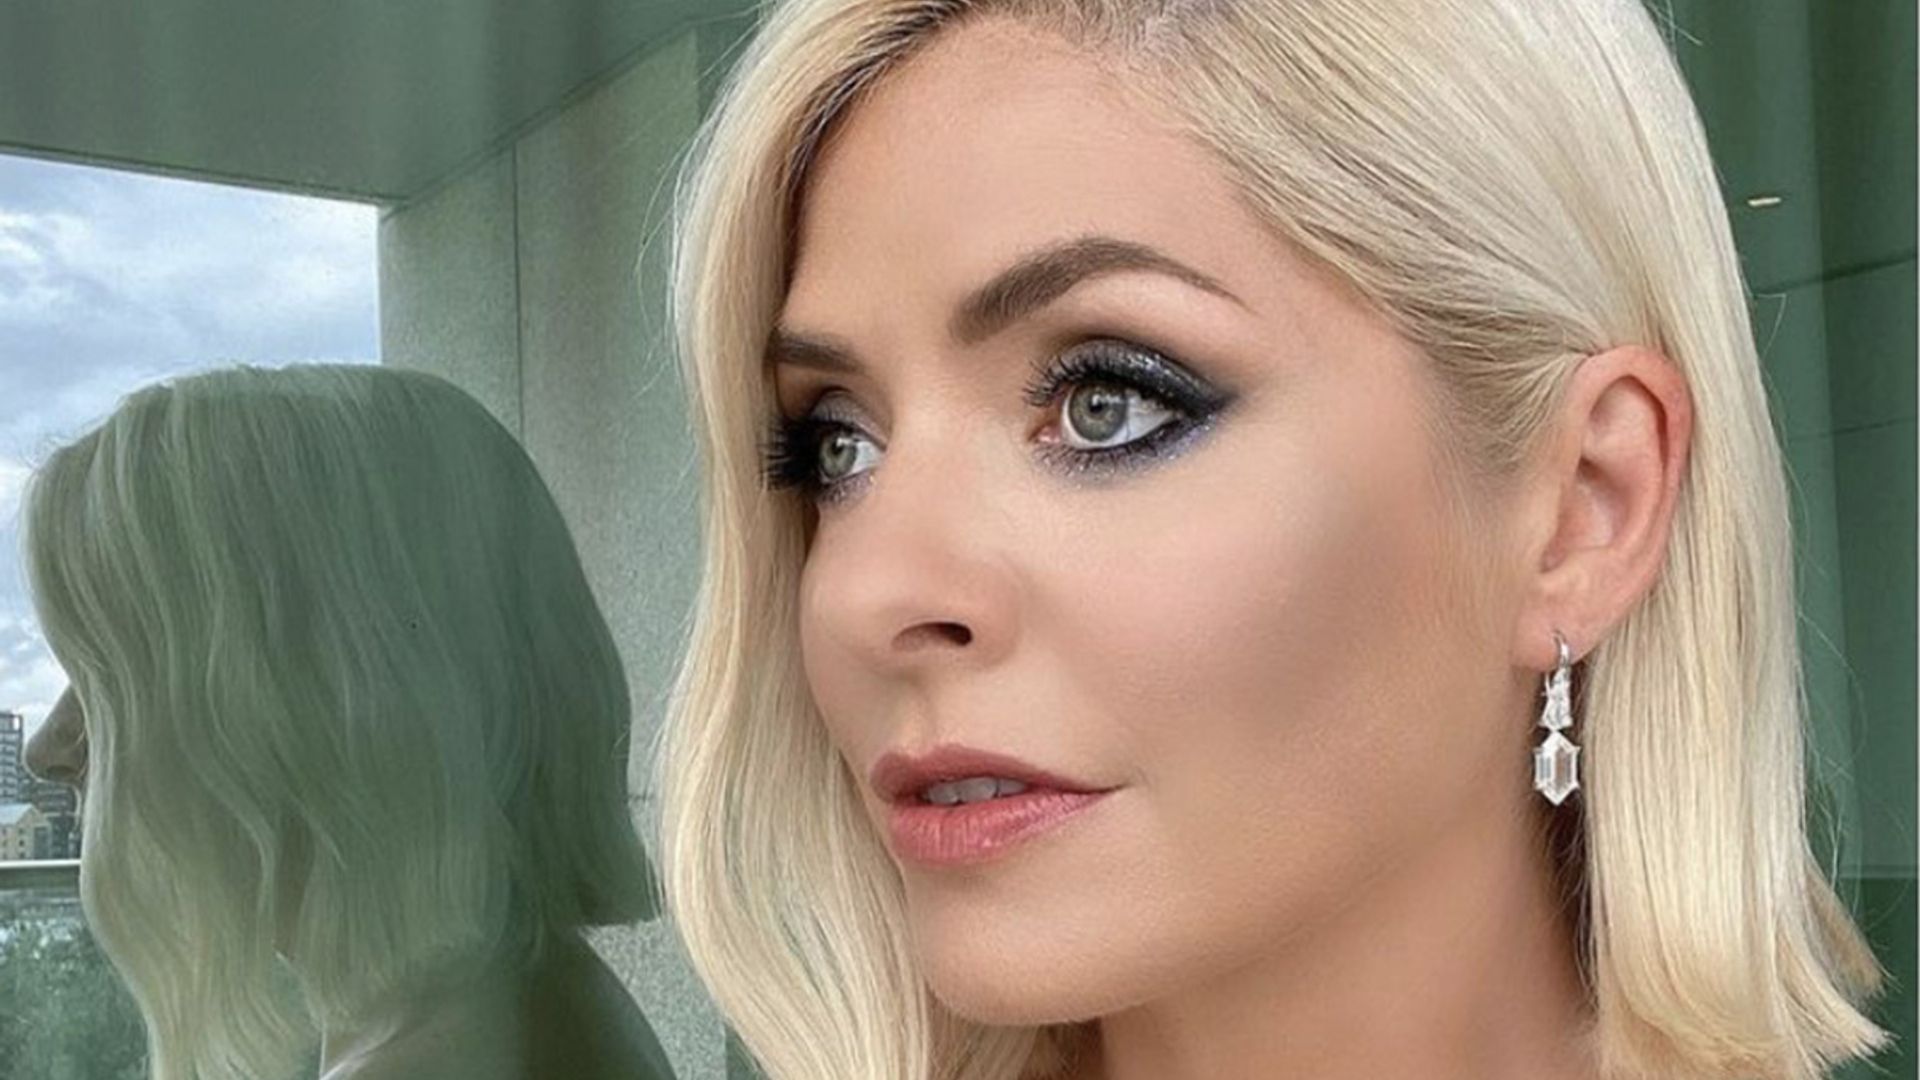 Holly Willoughby's £4 mascara revealed - and you should see her lashes